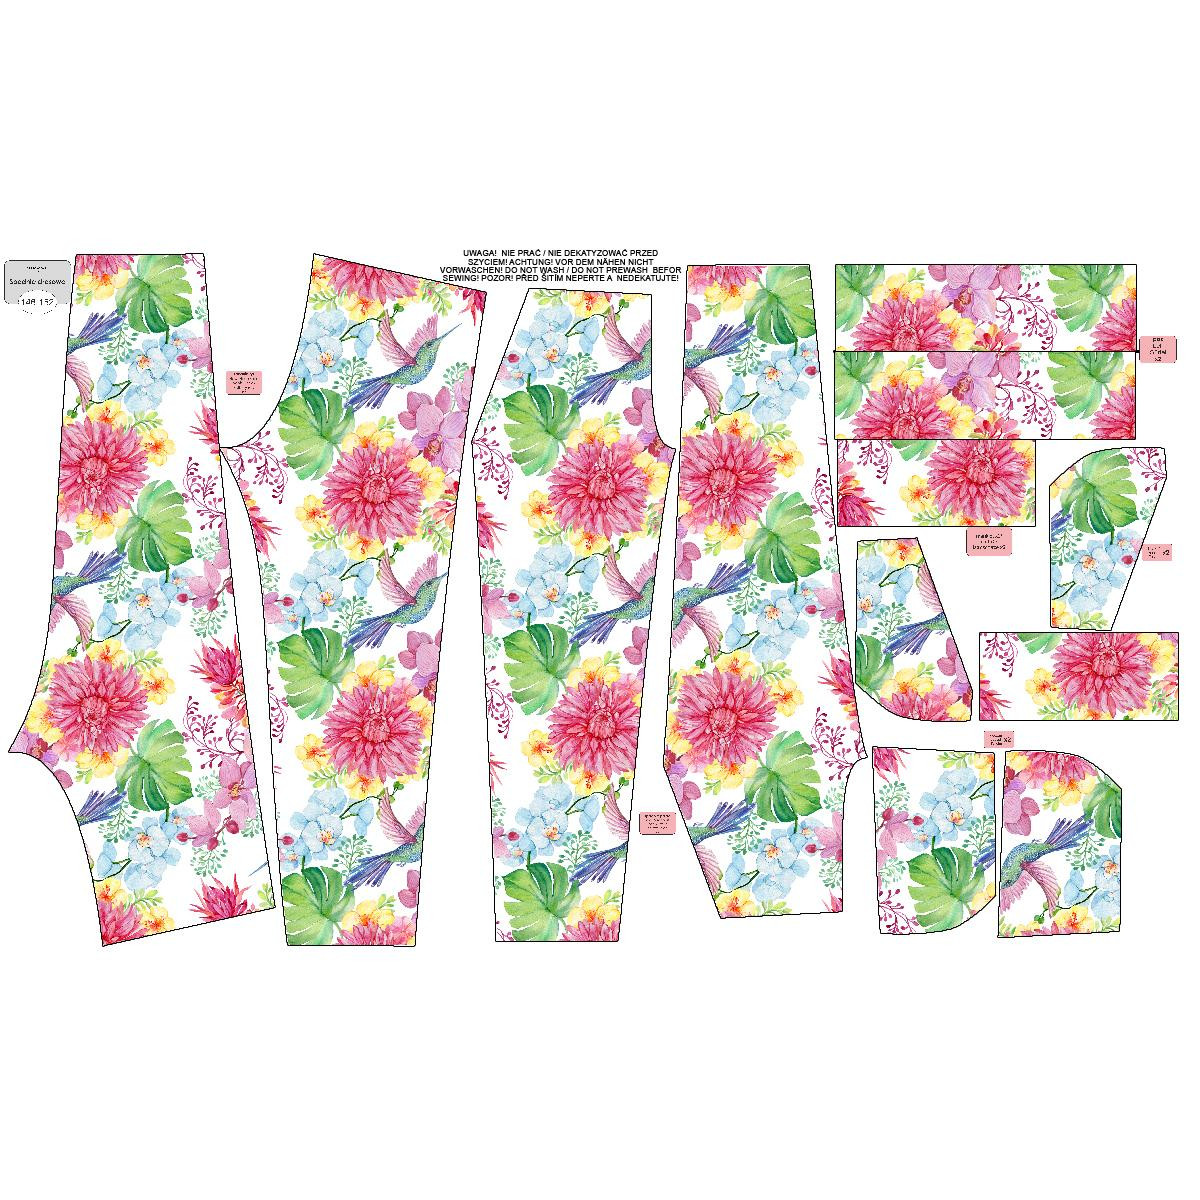 CHILDREN'S JOGGERS (LYON) - HUMMINGBIRDS AND FLOWERS pat. 2 - looped knit fabric